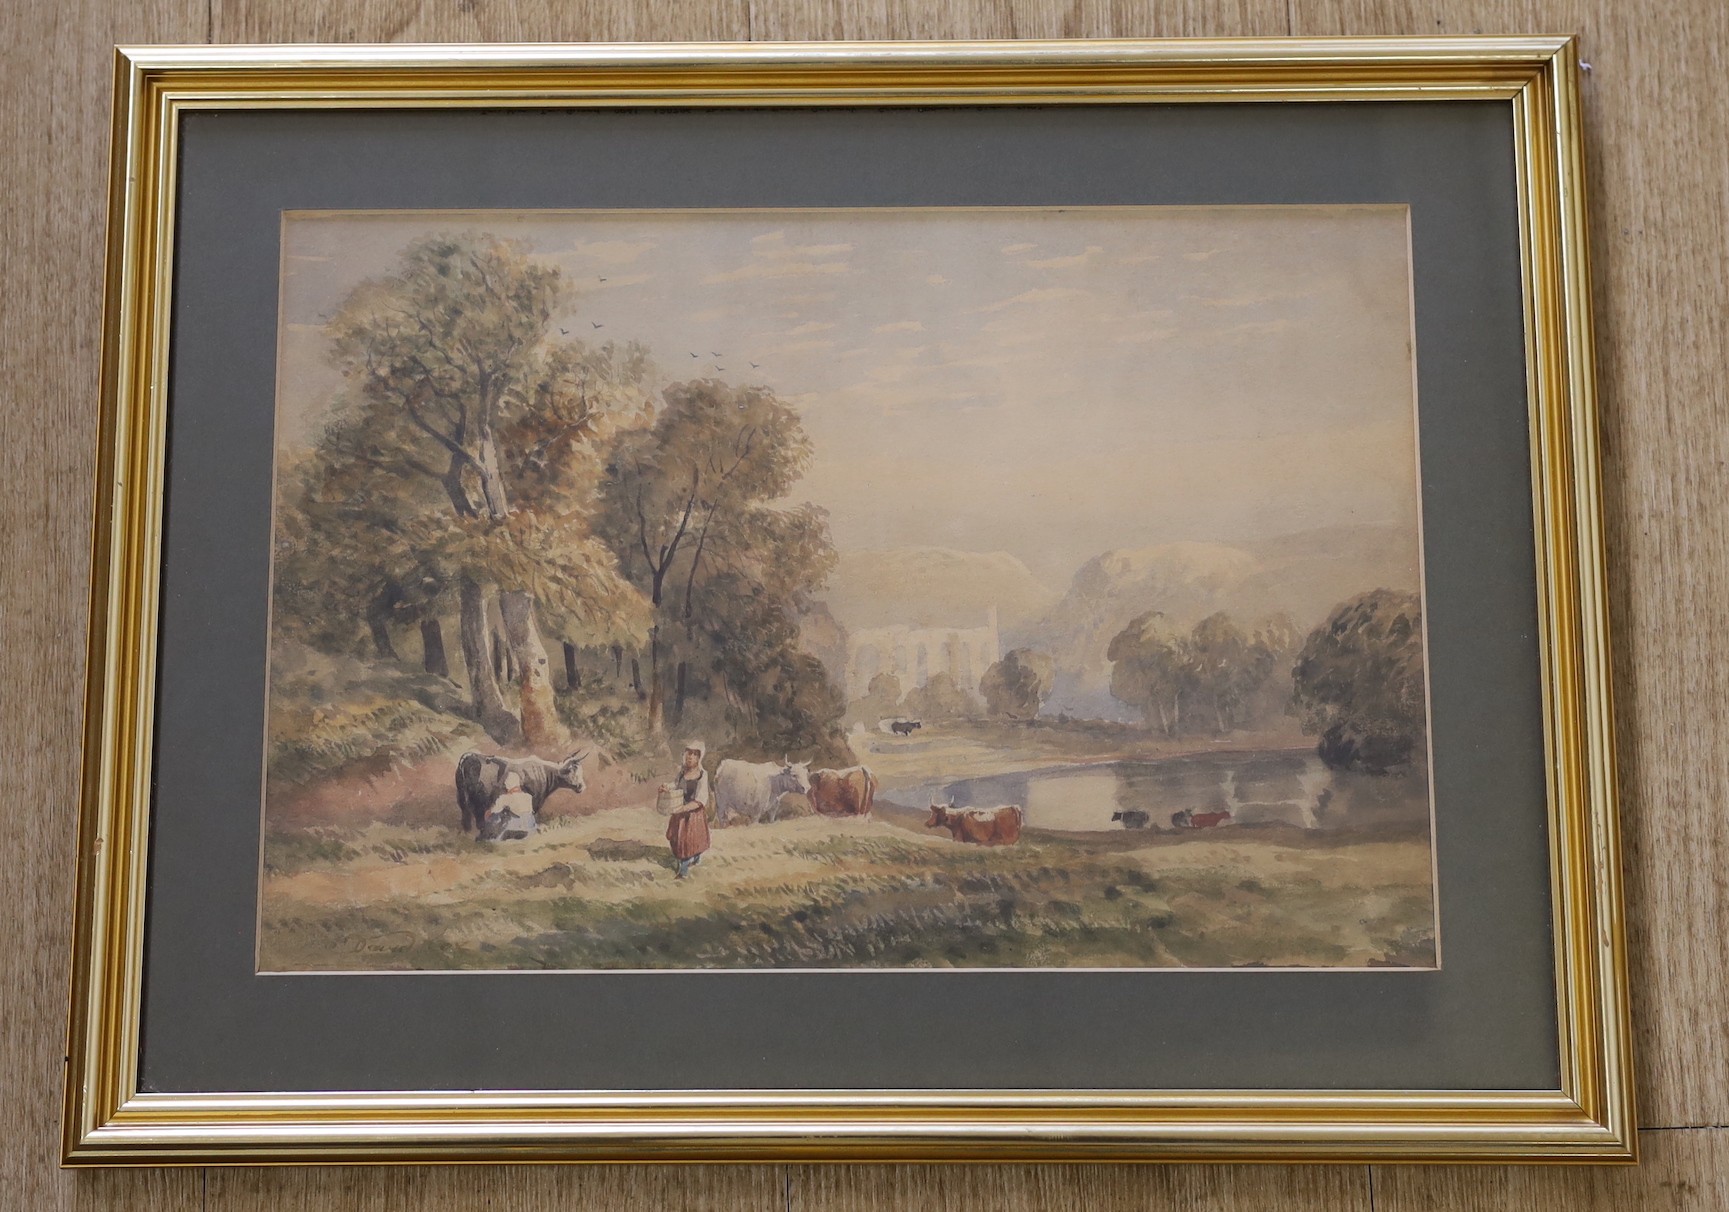 David Cox, O.W.S, (1783-1859), watercolour, Cattle maids in a landscape with abbey ruins beyond, signed, 25 x 37cm